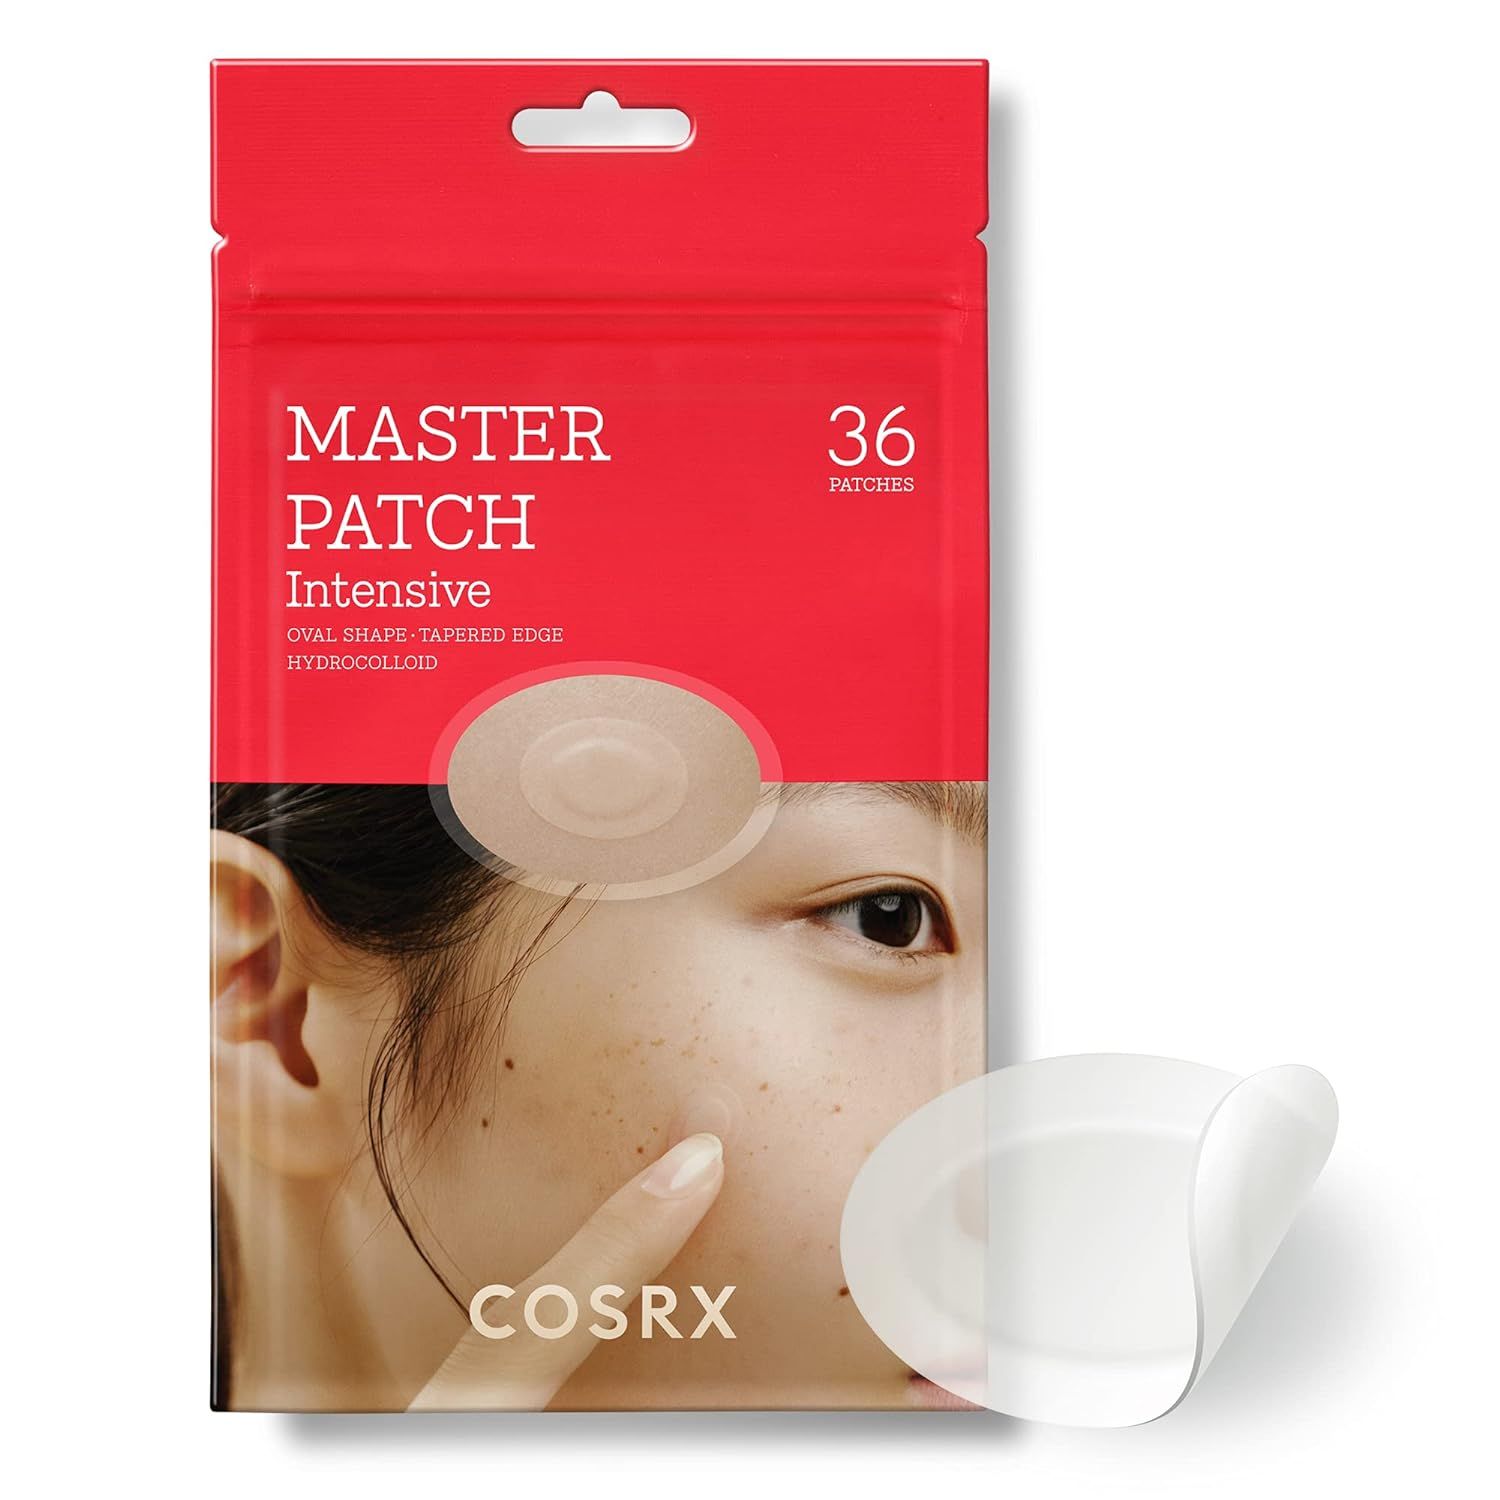 COSRX Master Pimple Patch Intensive | Oval-Shaped Acne Patch Hydrocolloid, Active Salicylic Acid ... | Amazon (US)